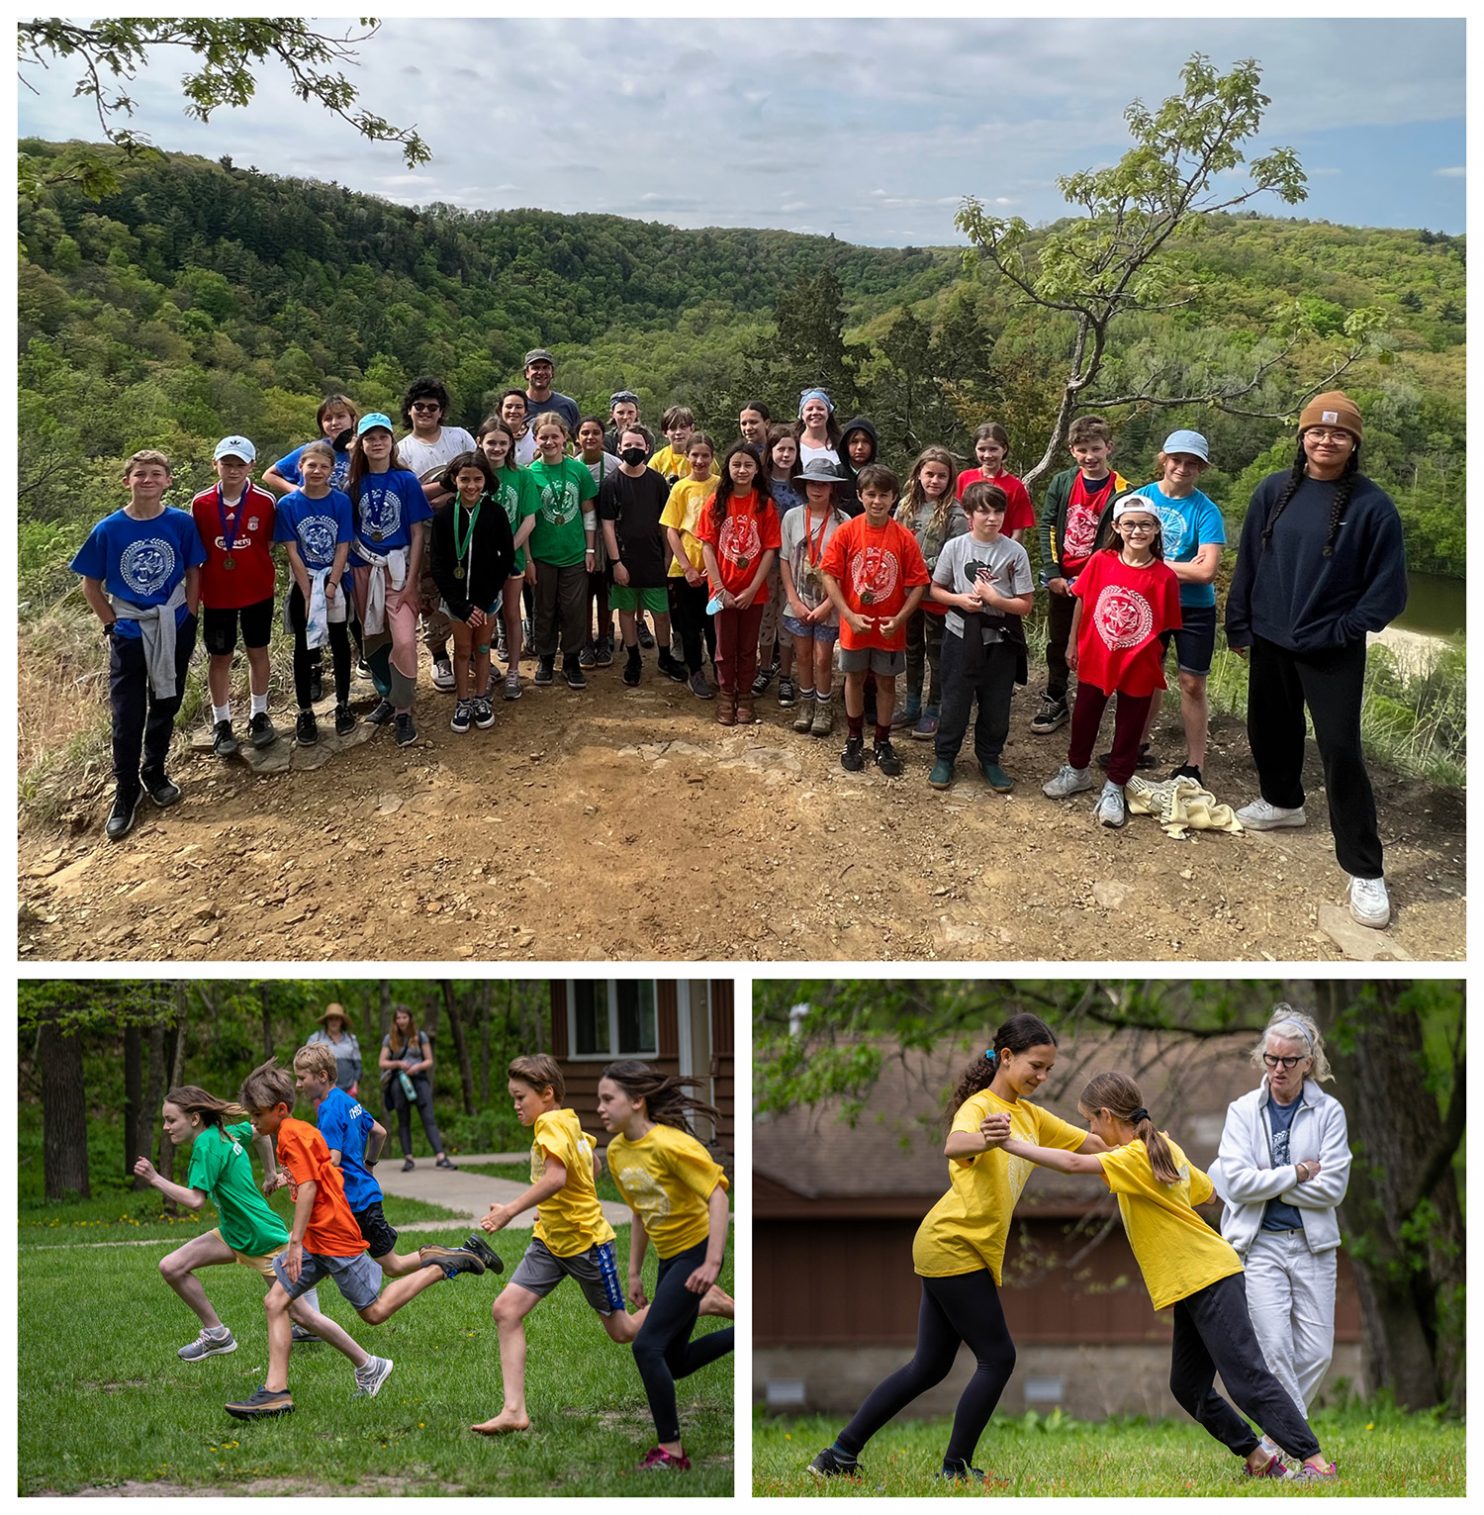 All of the 5th grade students stand on the bluff, overlooking the valley. They're wearing their rainbow-colored Pentathlon shirts, and smiling big smiles -- their final hike of the trip before heading home.